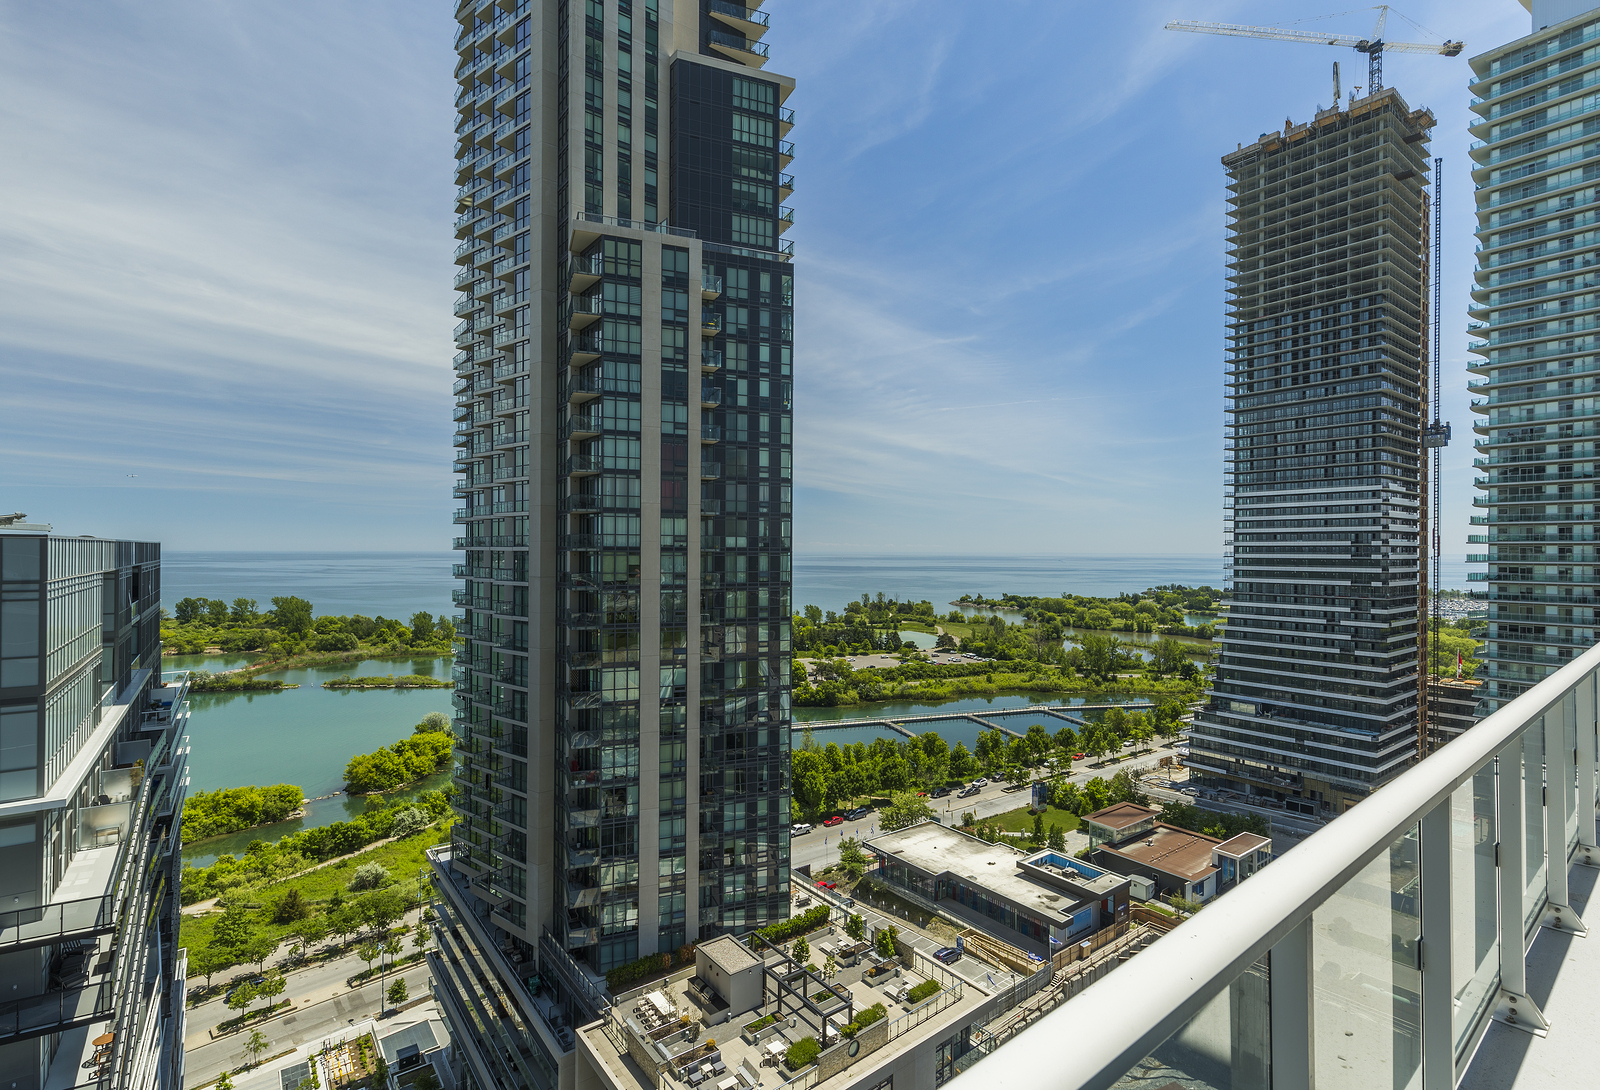 Residential Buildings In Downtown Toronto On The Lake Shore Of O